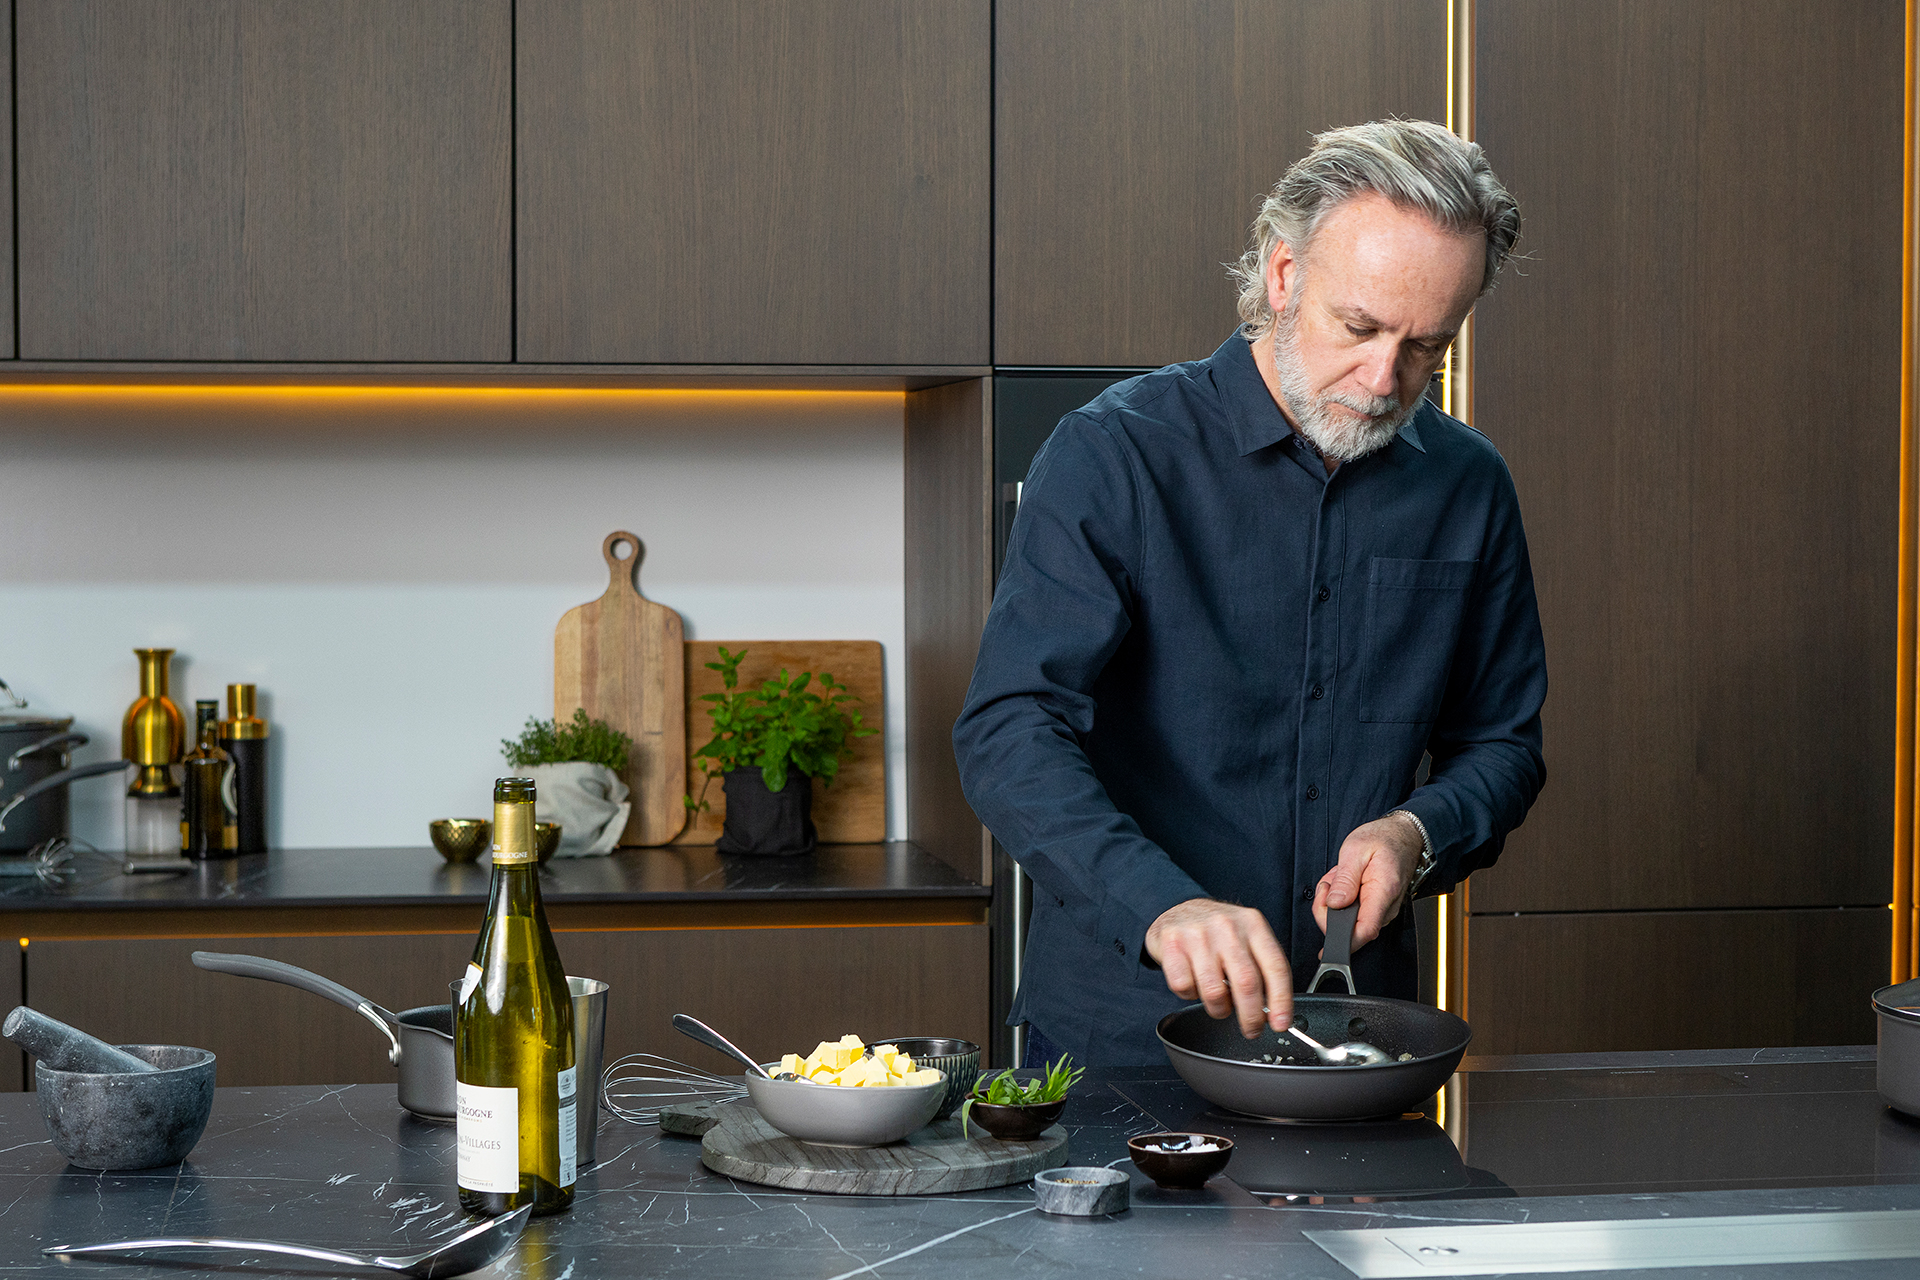 commercial food photographer shooting for Marcus wareing